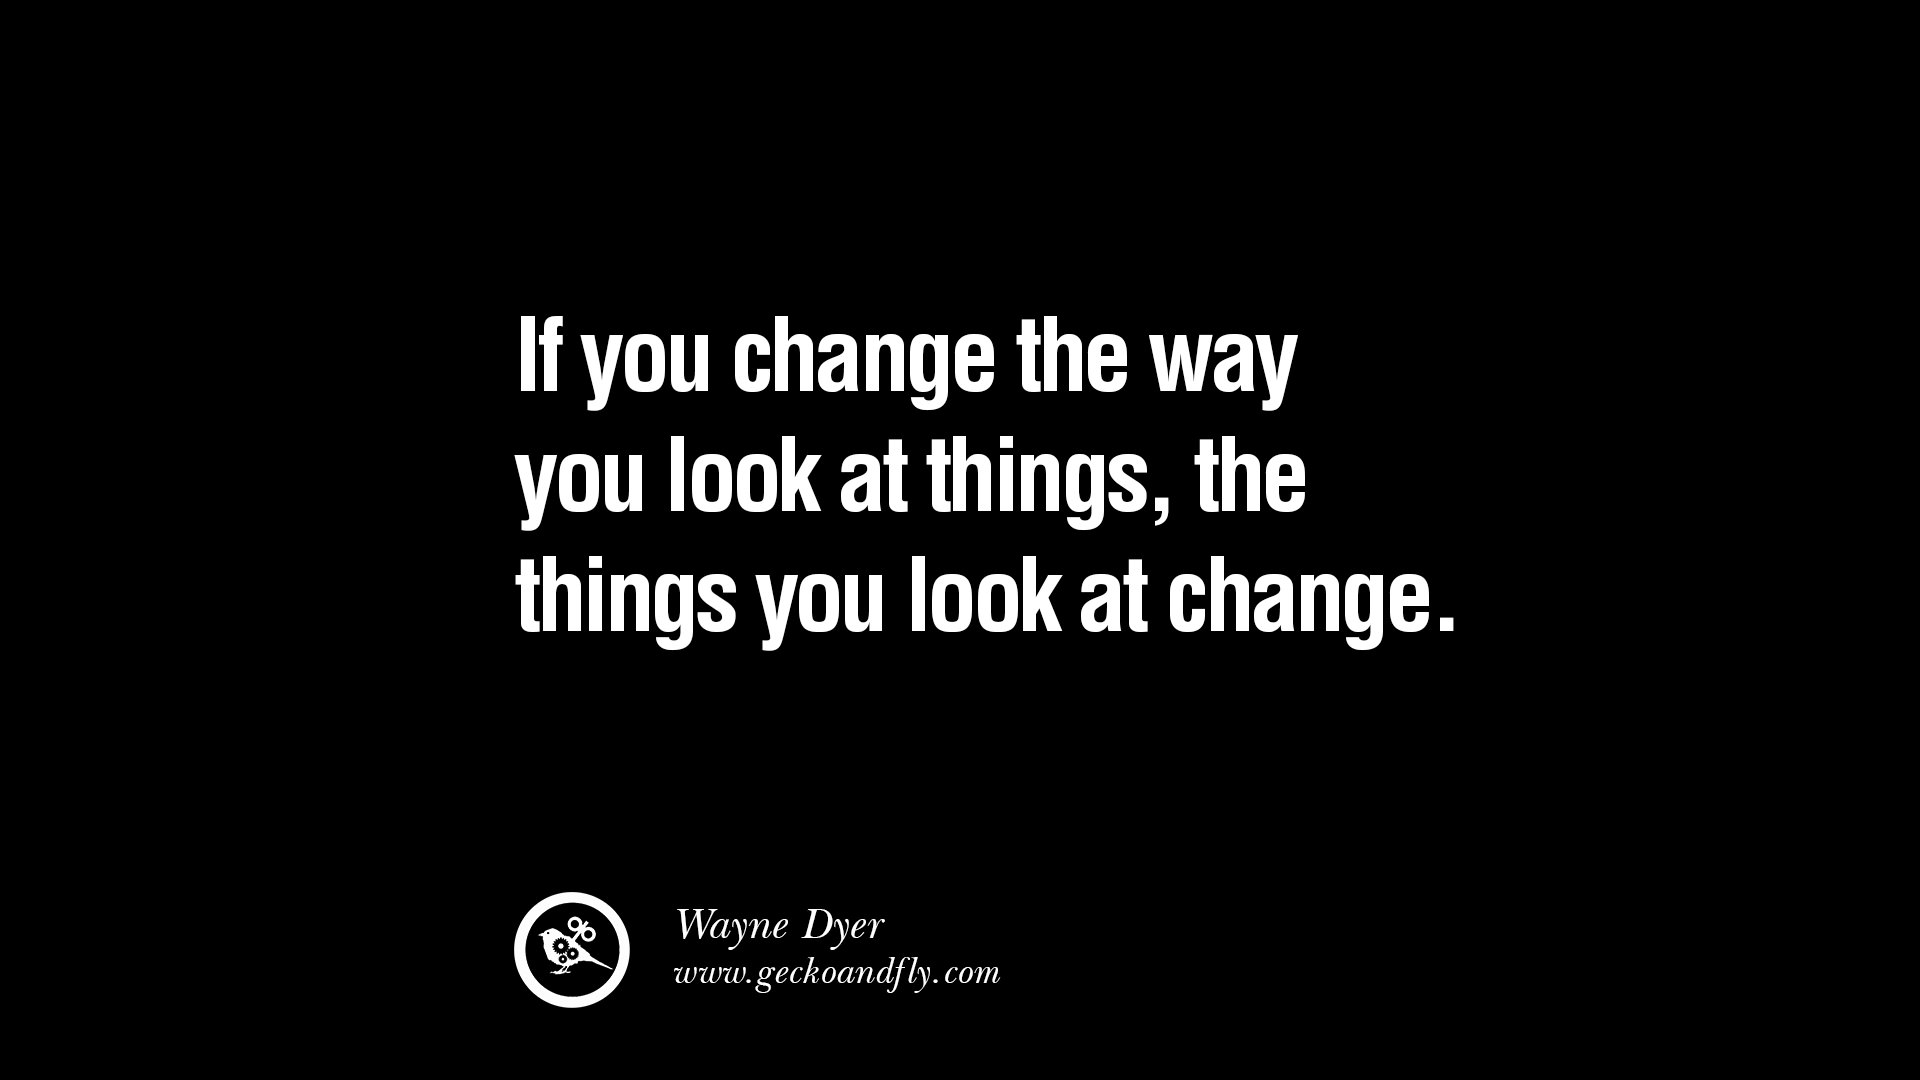 inspirational-quotes-on-change-changing-attitude-thinking8.jpg